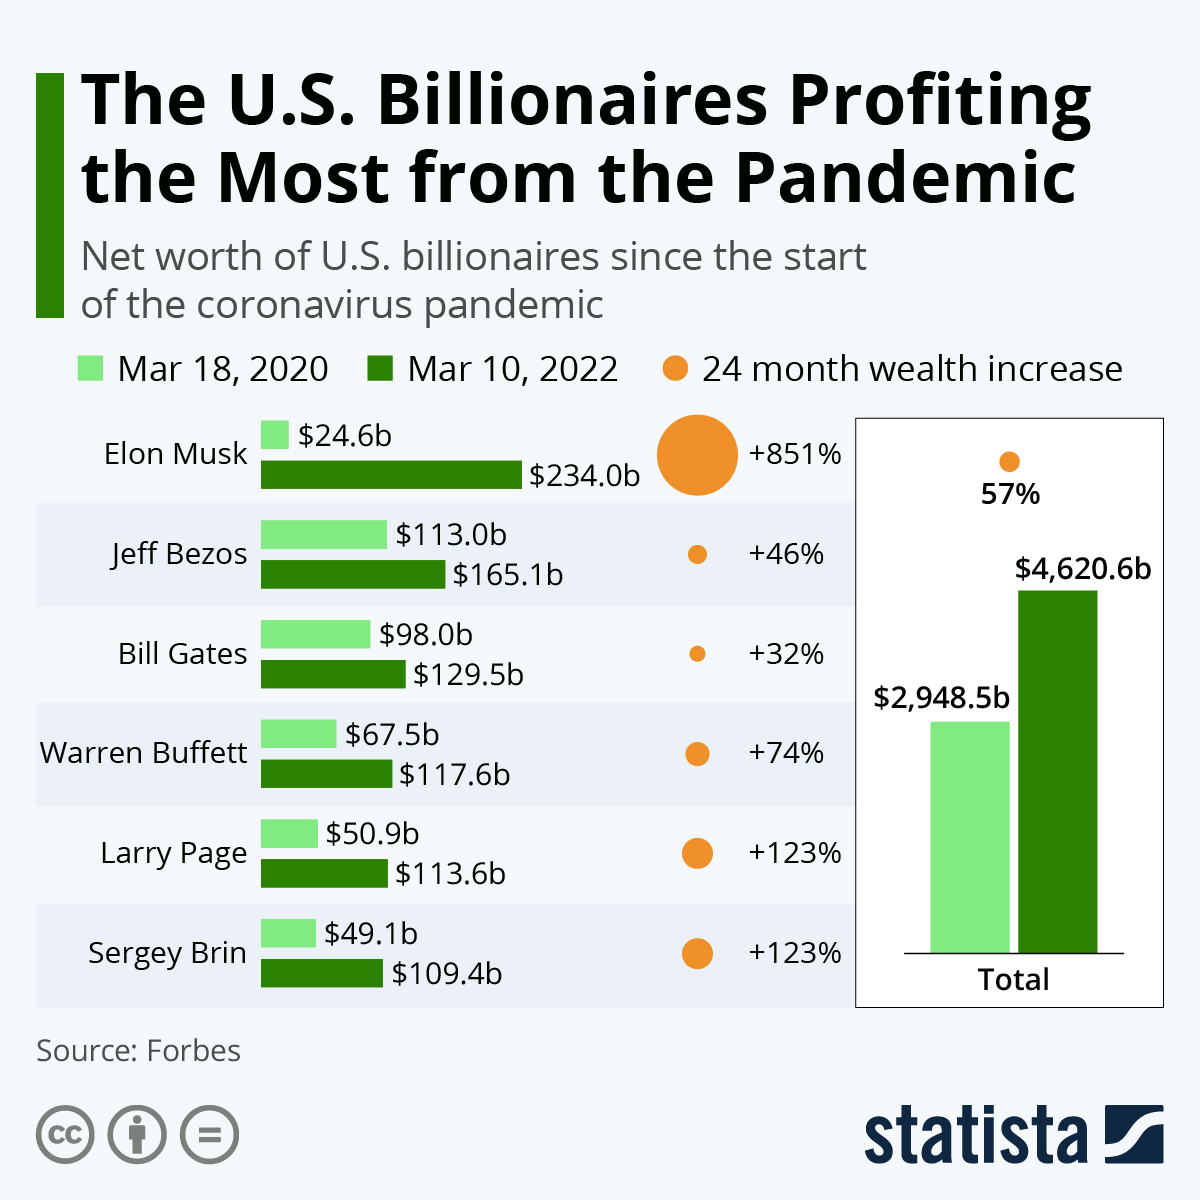 The U.S. billionaires profiting the most from the pandemic